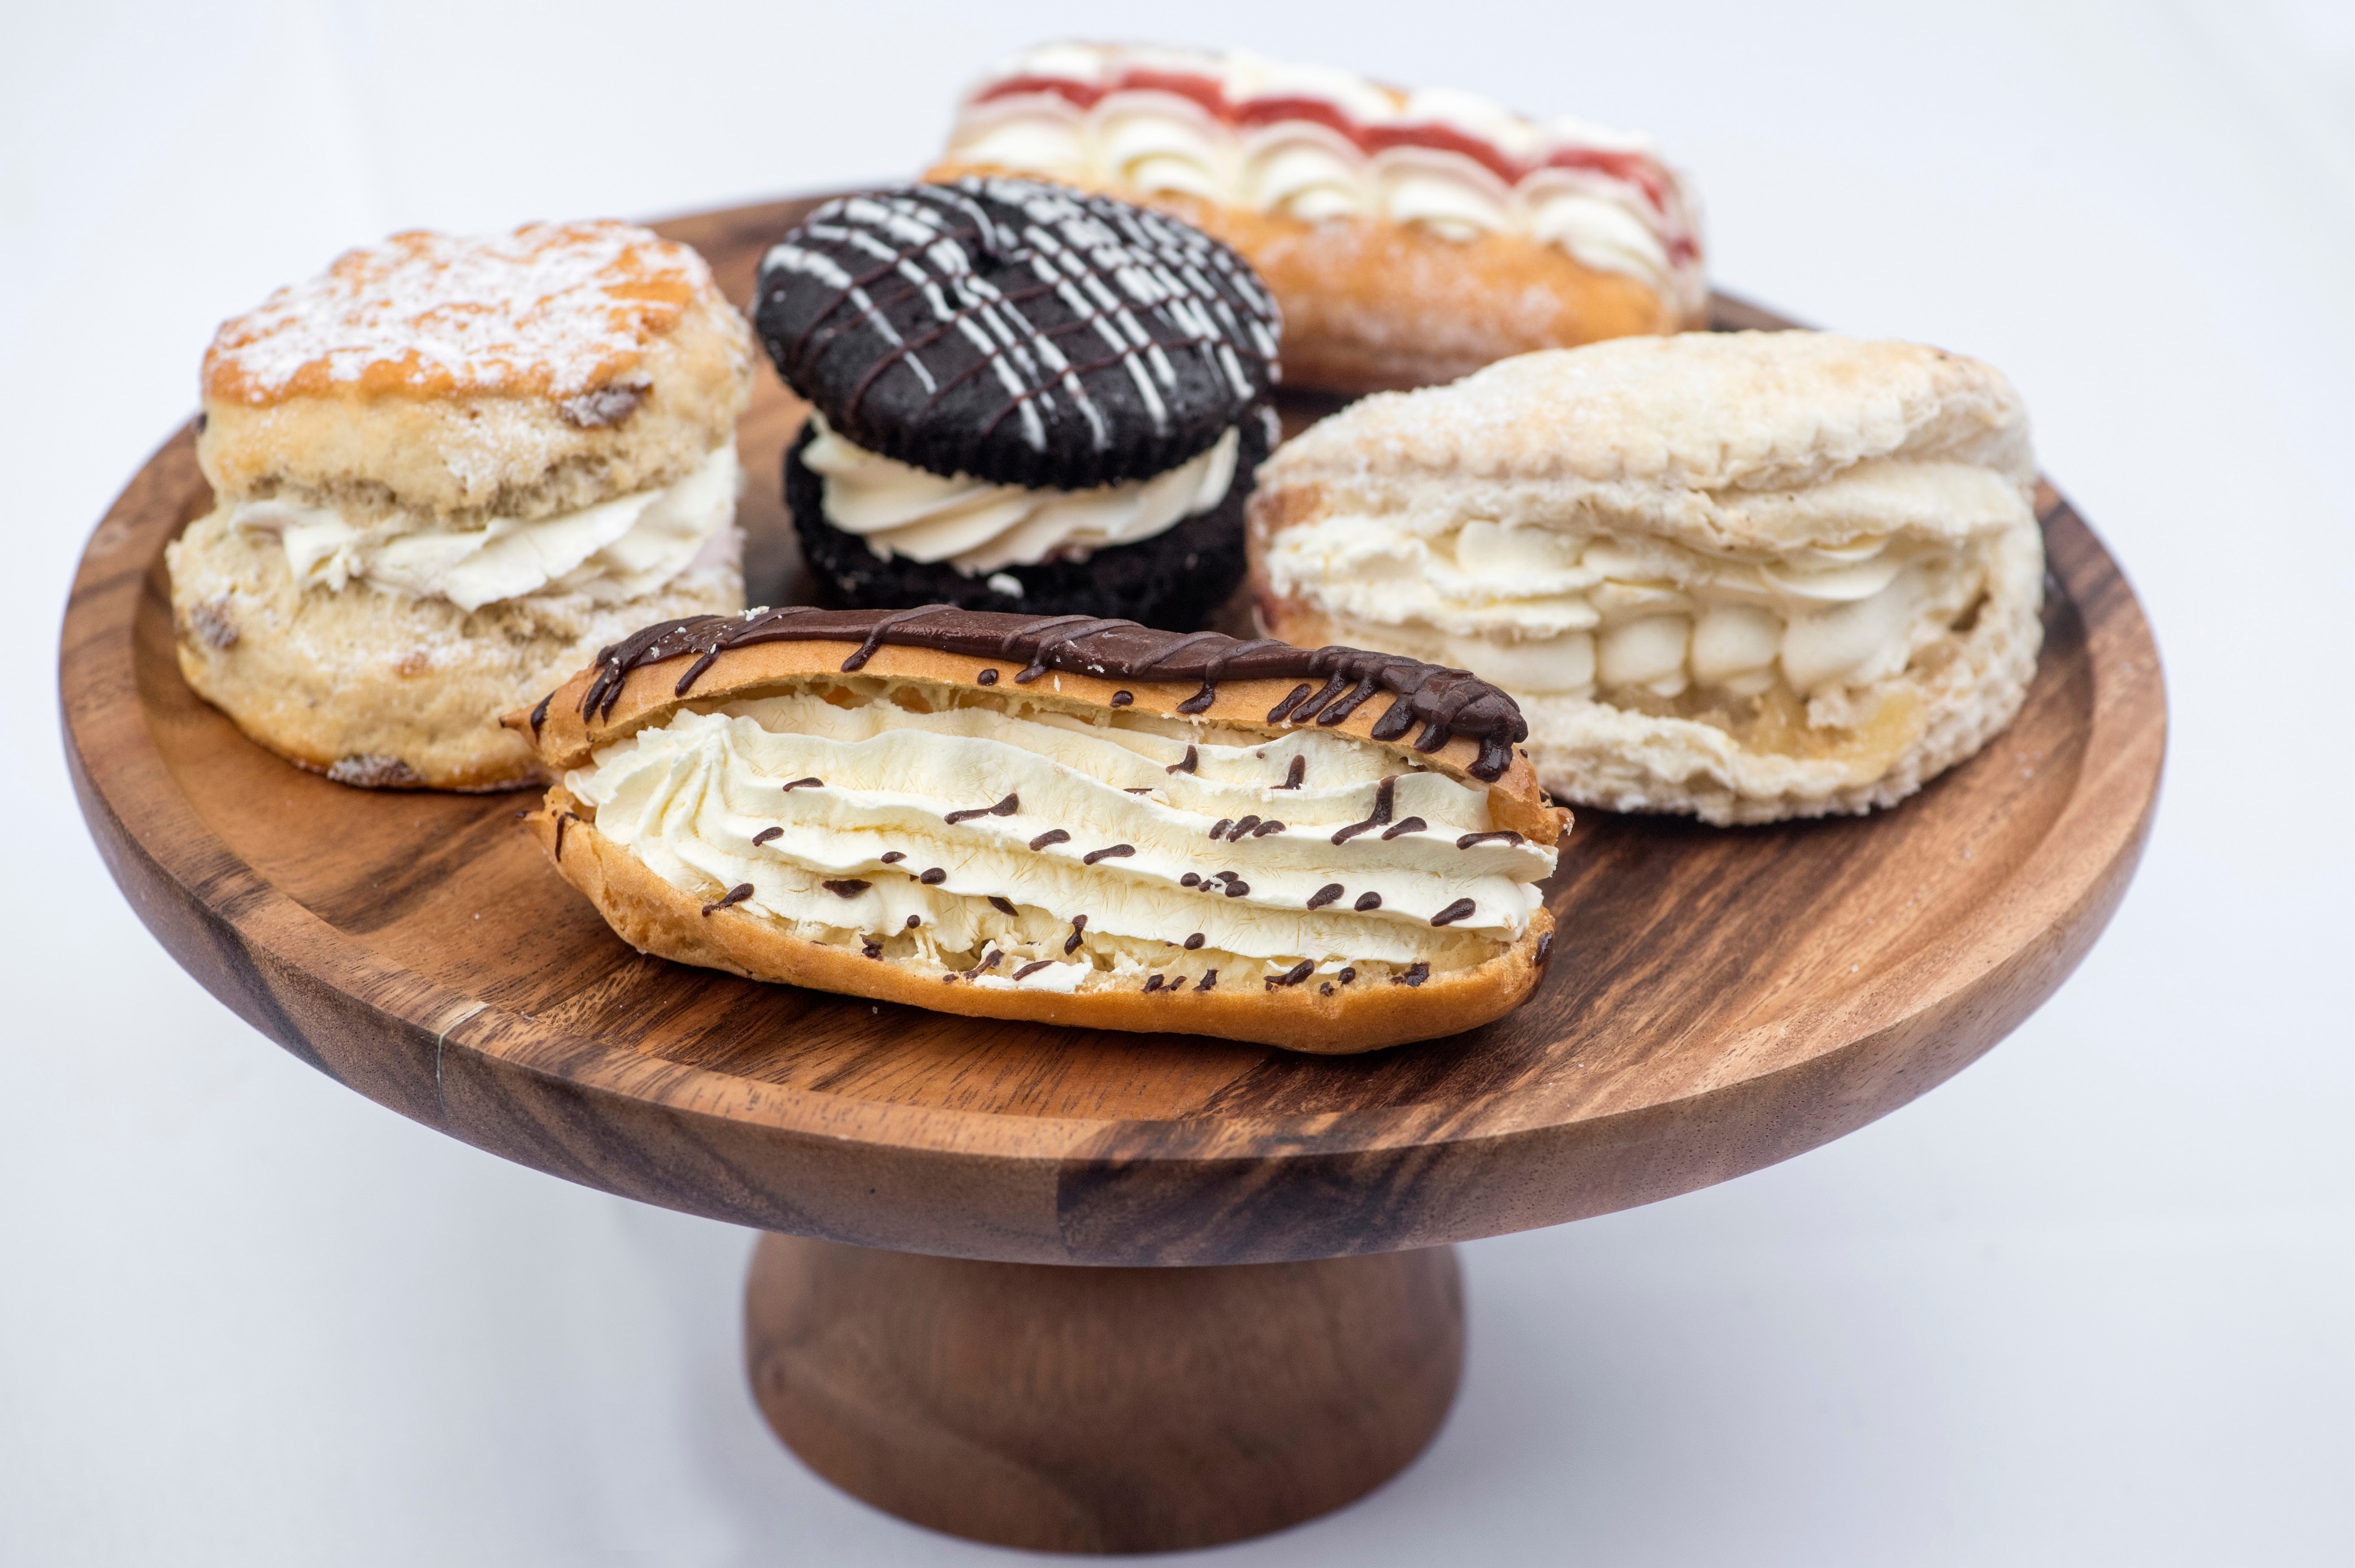 Image of cakes on a wooden plate